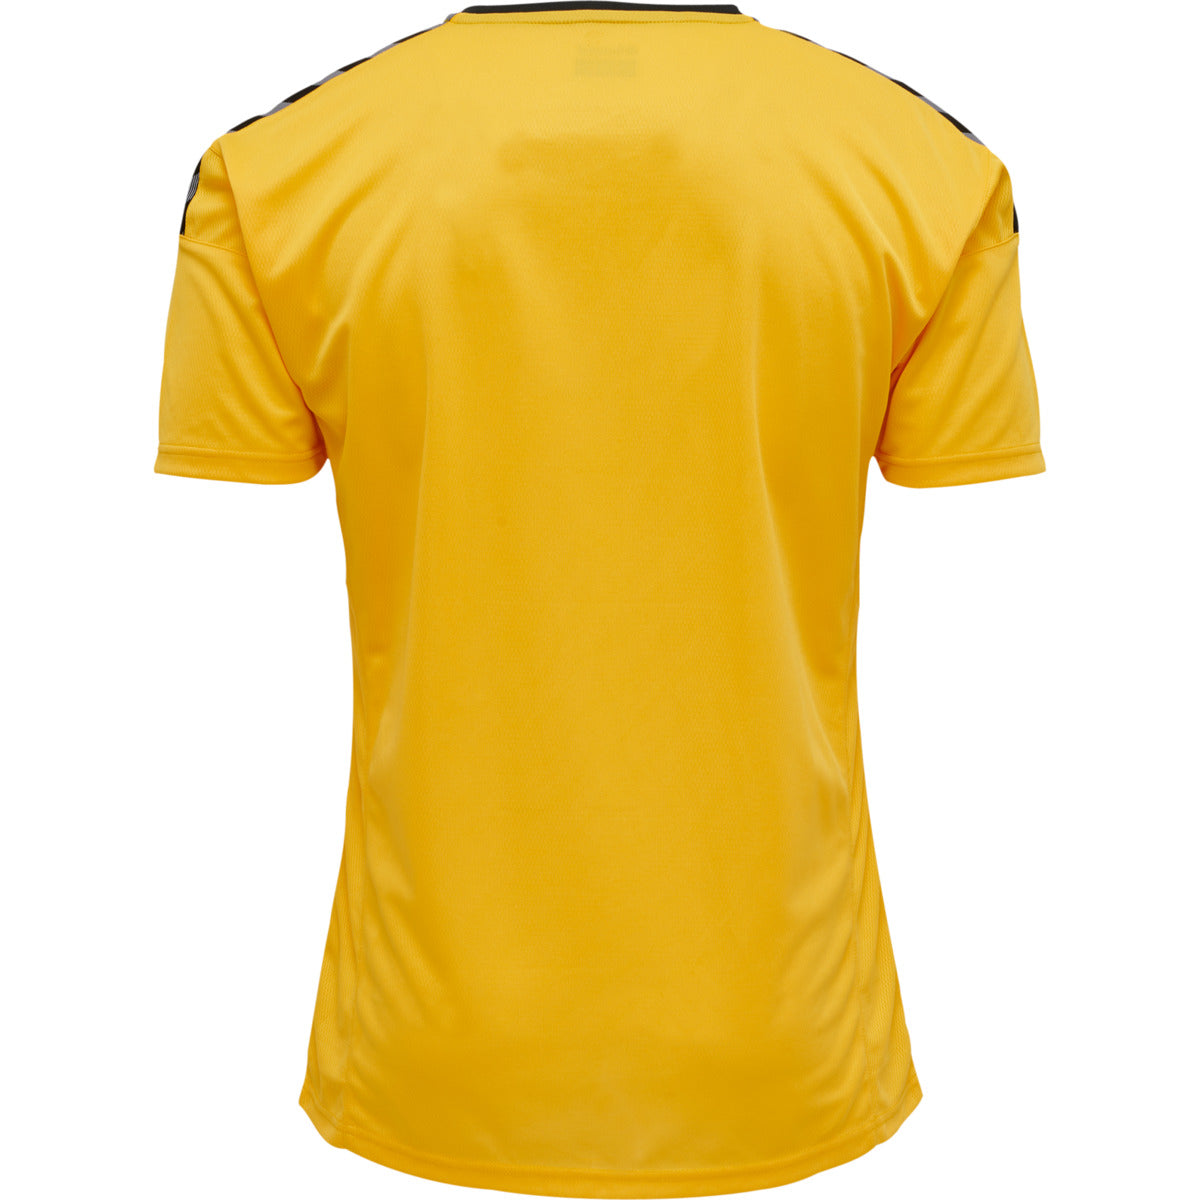 hmlAUTHENTIC POLY JERSEY S/S SPORTS YELLOW/BLACK